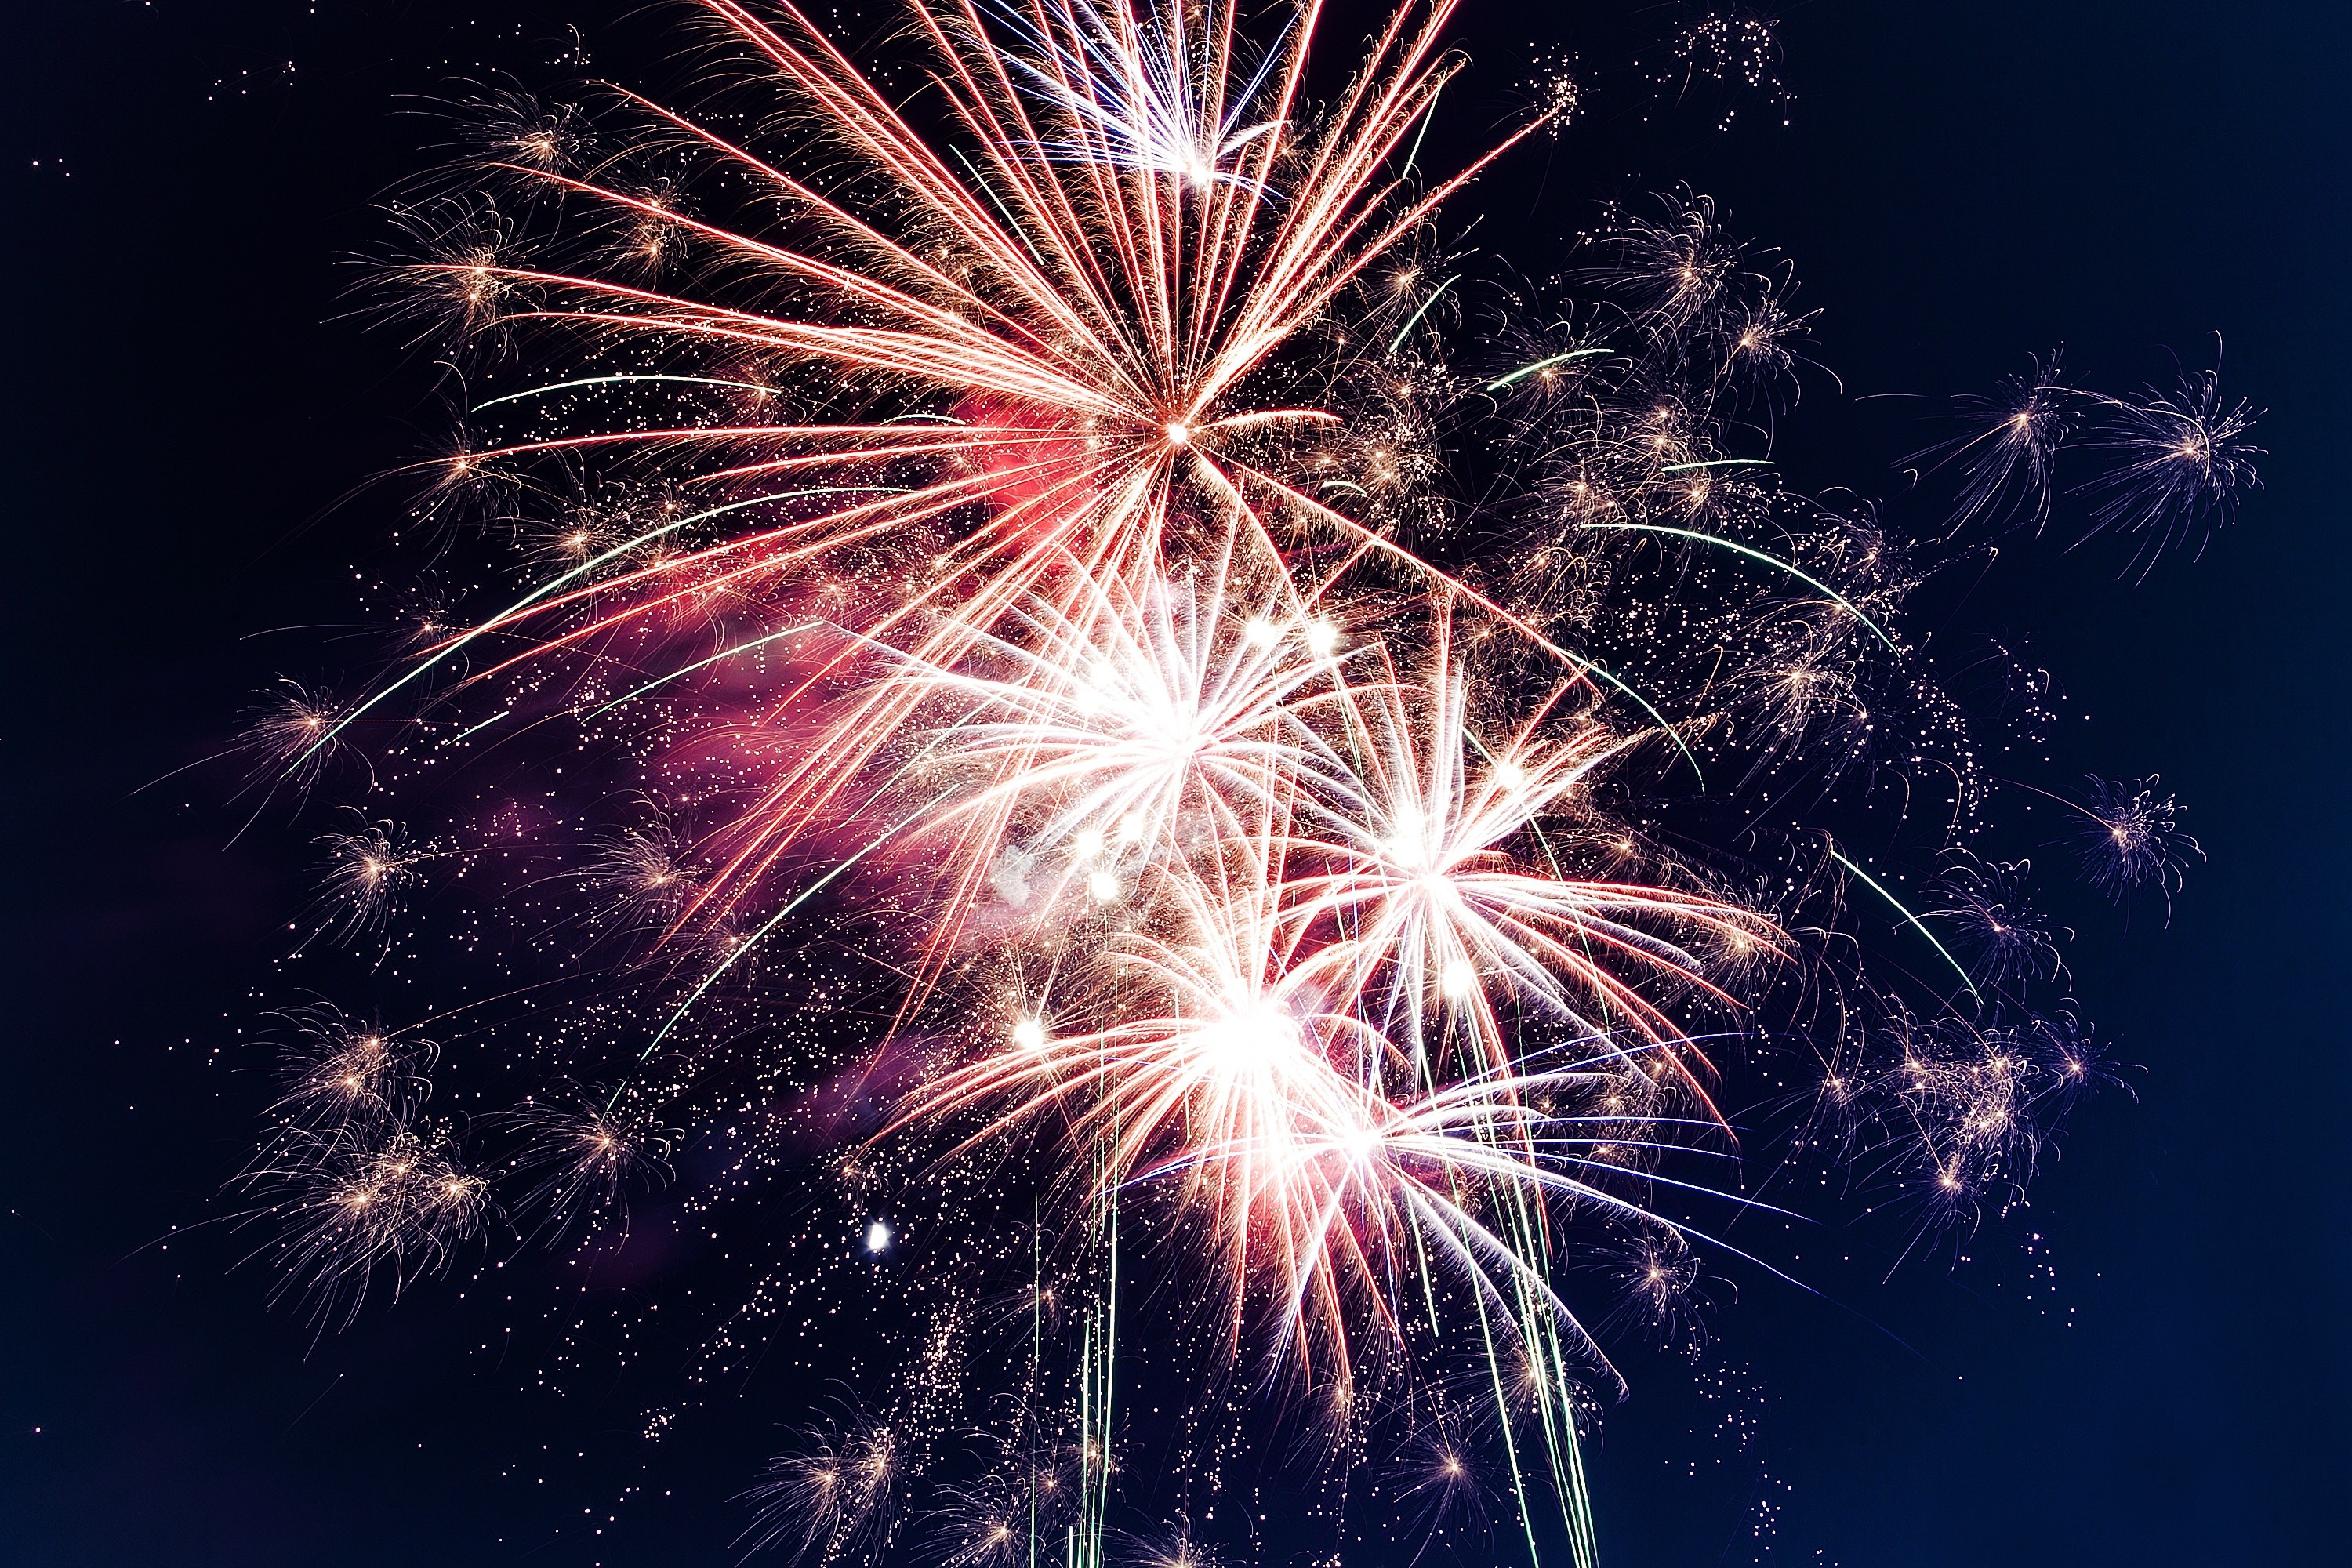 2018 Canada Day | Roven Images on Unsplash